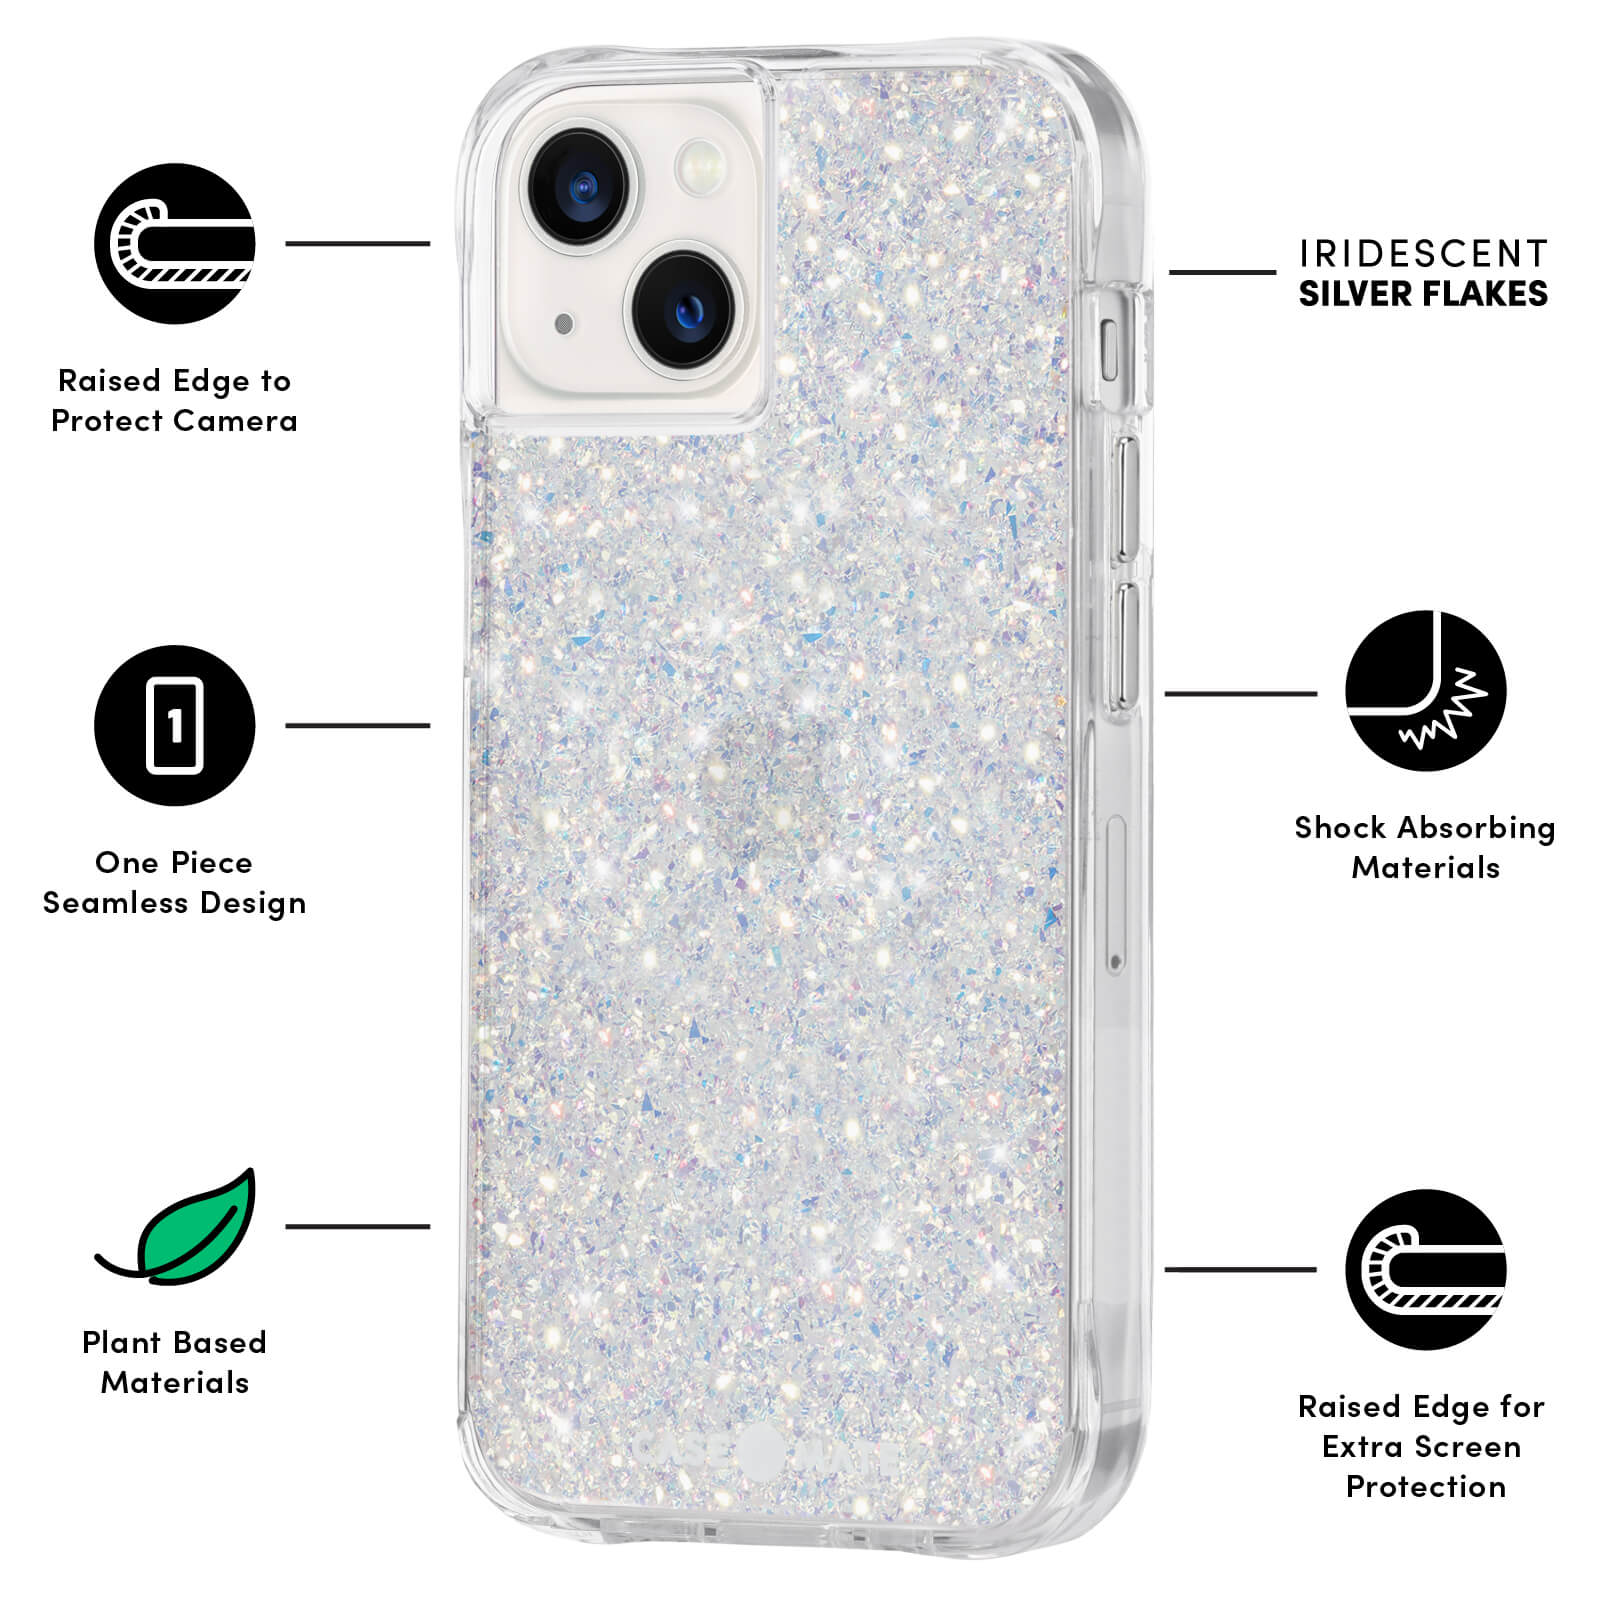 FEATURES: RAISED EDGE TO PROTECT CAMERA, ONE PIECE SEAMLESS DESIGN, PLANT BASED MATERIALS, IRIDESCENT SILVER FLAKES, SHOCK ABSORBING MATERIALS, RAISED EDGE FOR EXTRA SCREEN PROTECTION. COLOR::TWINKLE STARDUST